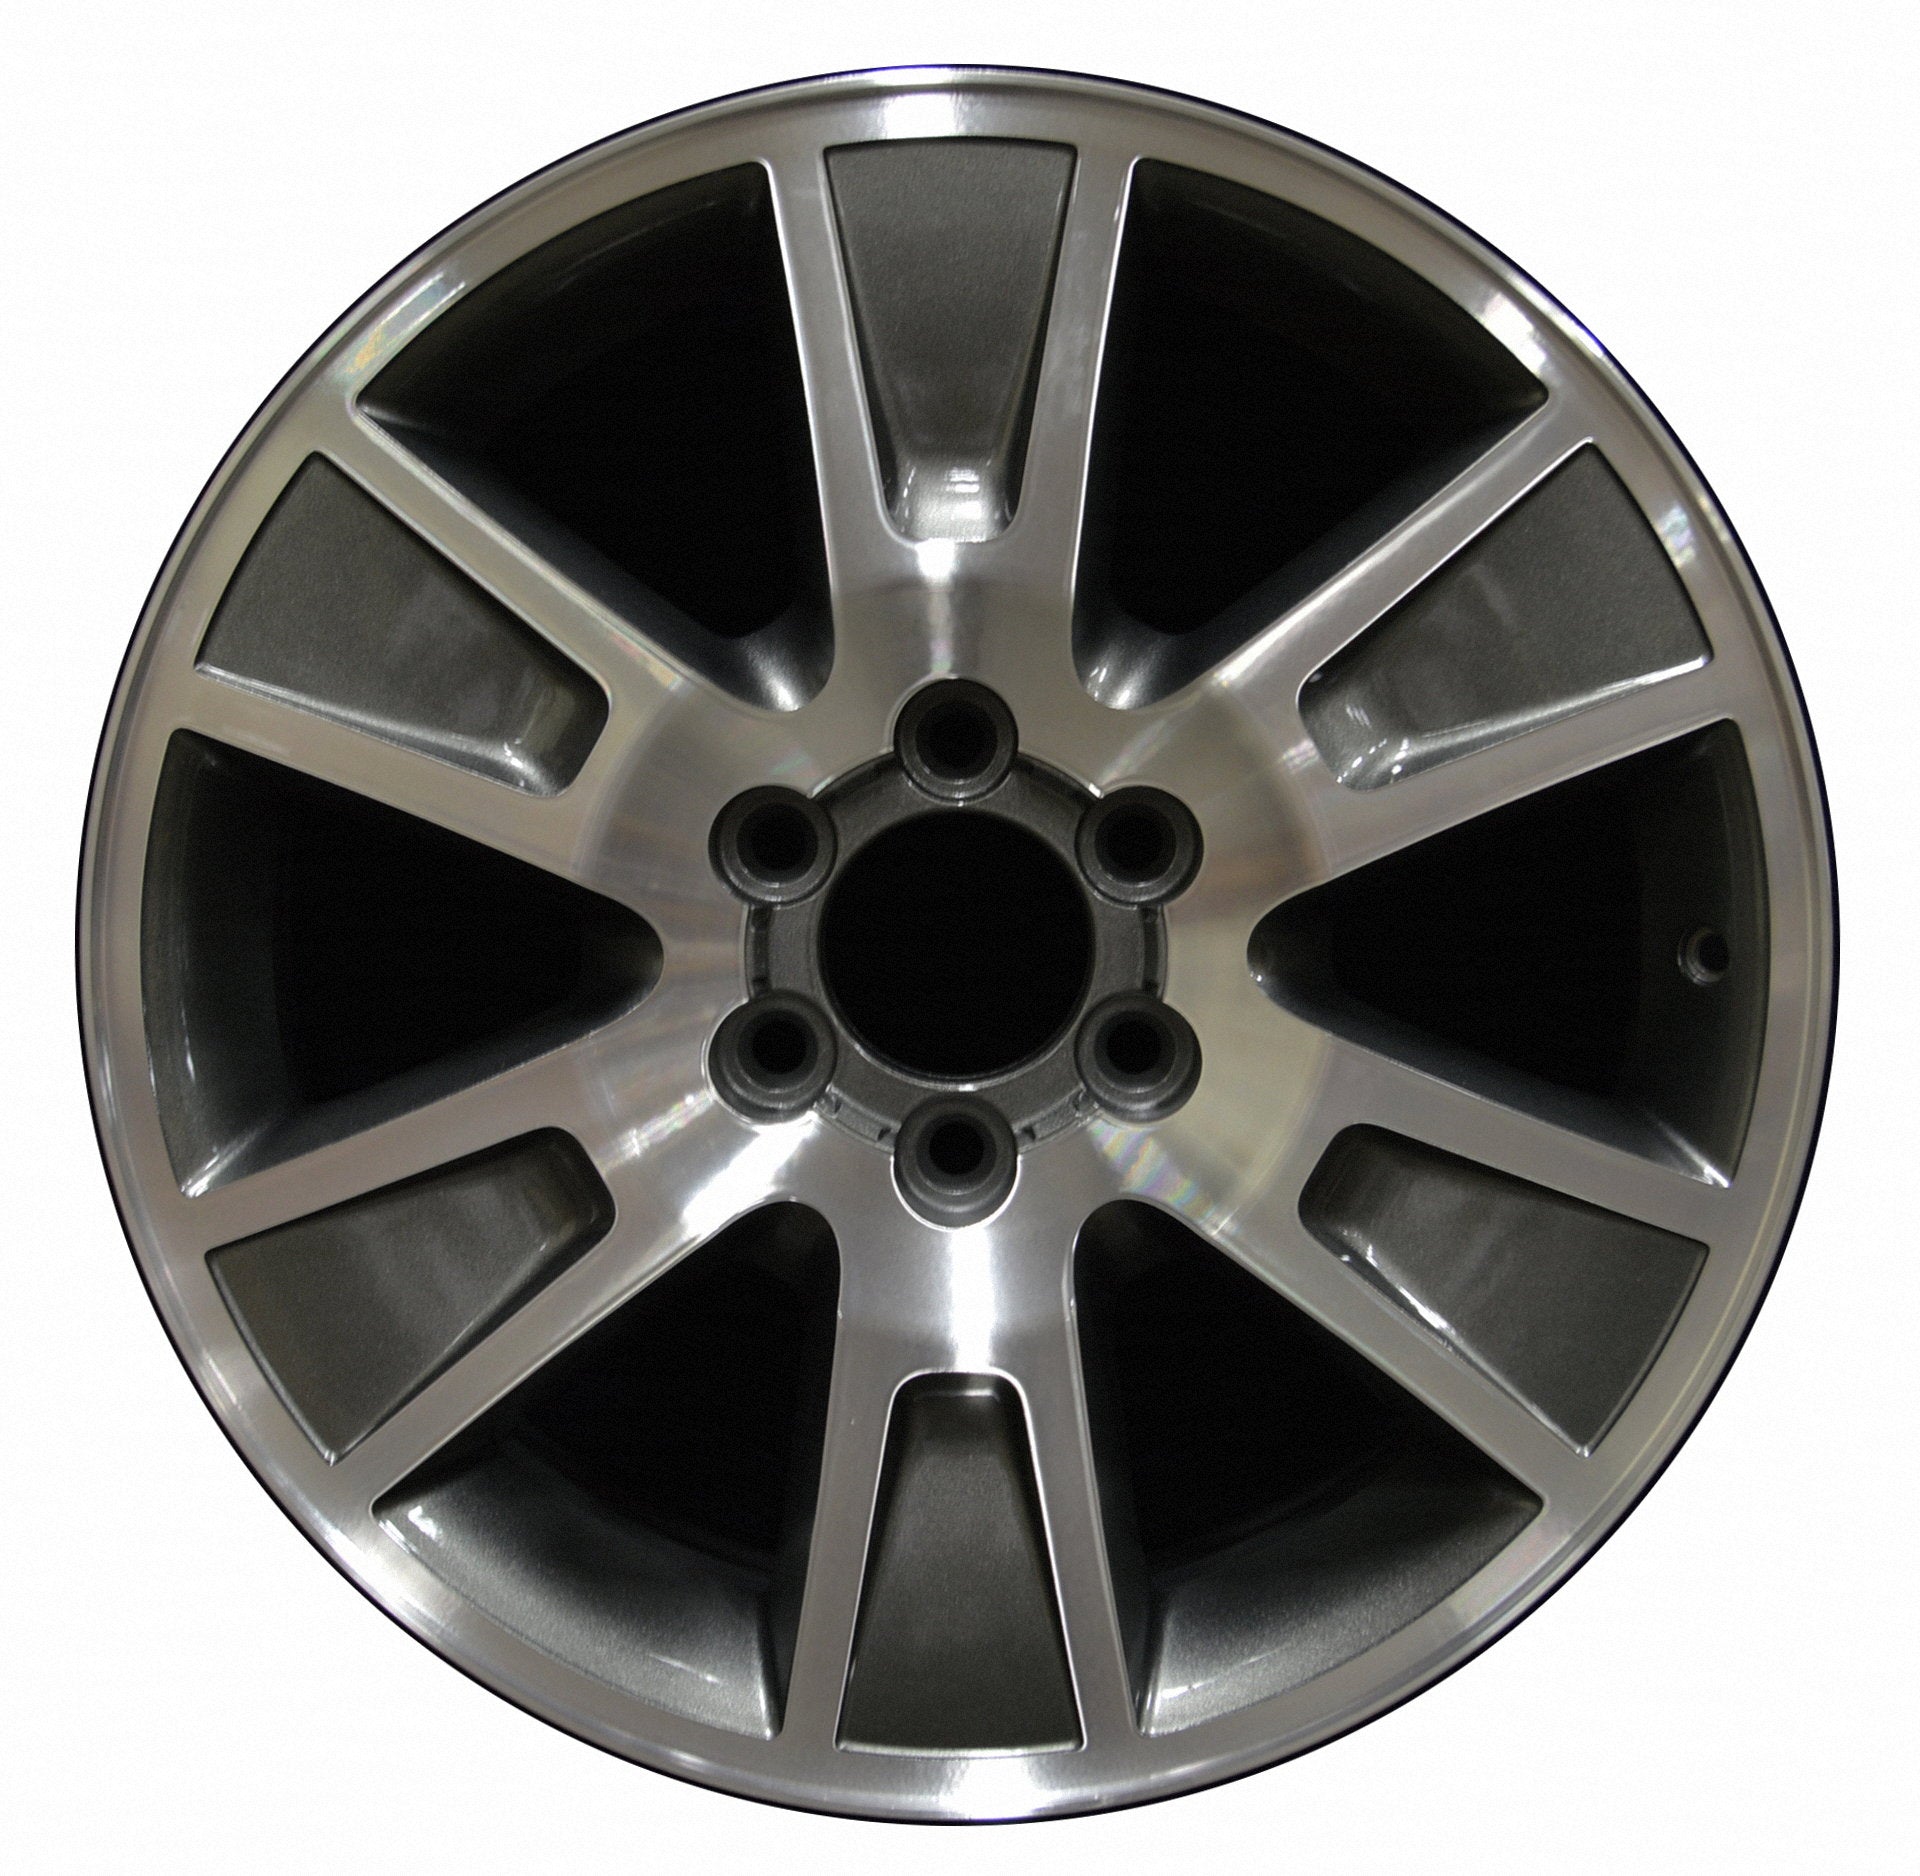 Ford F150 Truck  2009, 2010, 2011, 2012, 2013, 2014 Factory OEM Car Wheel Size 20x8.5 Alloy WAO.3787.LC89.MA